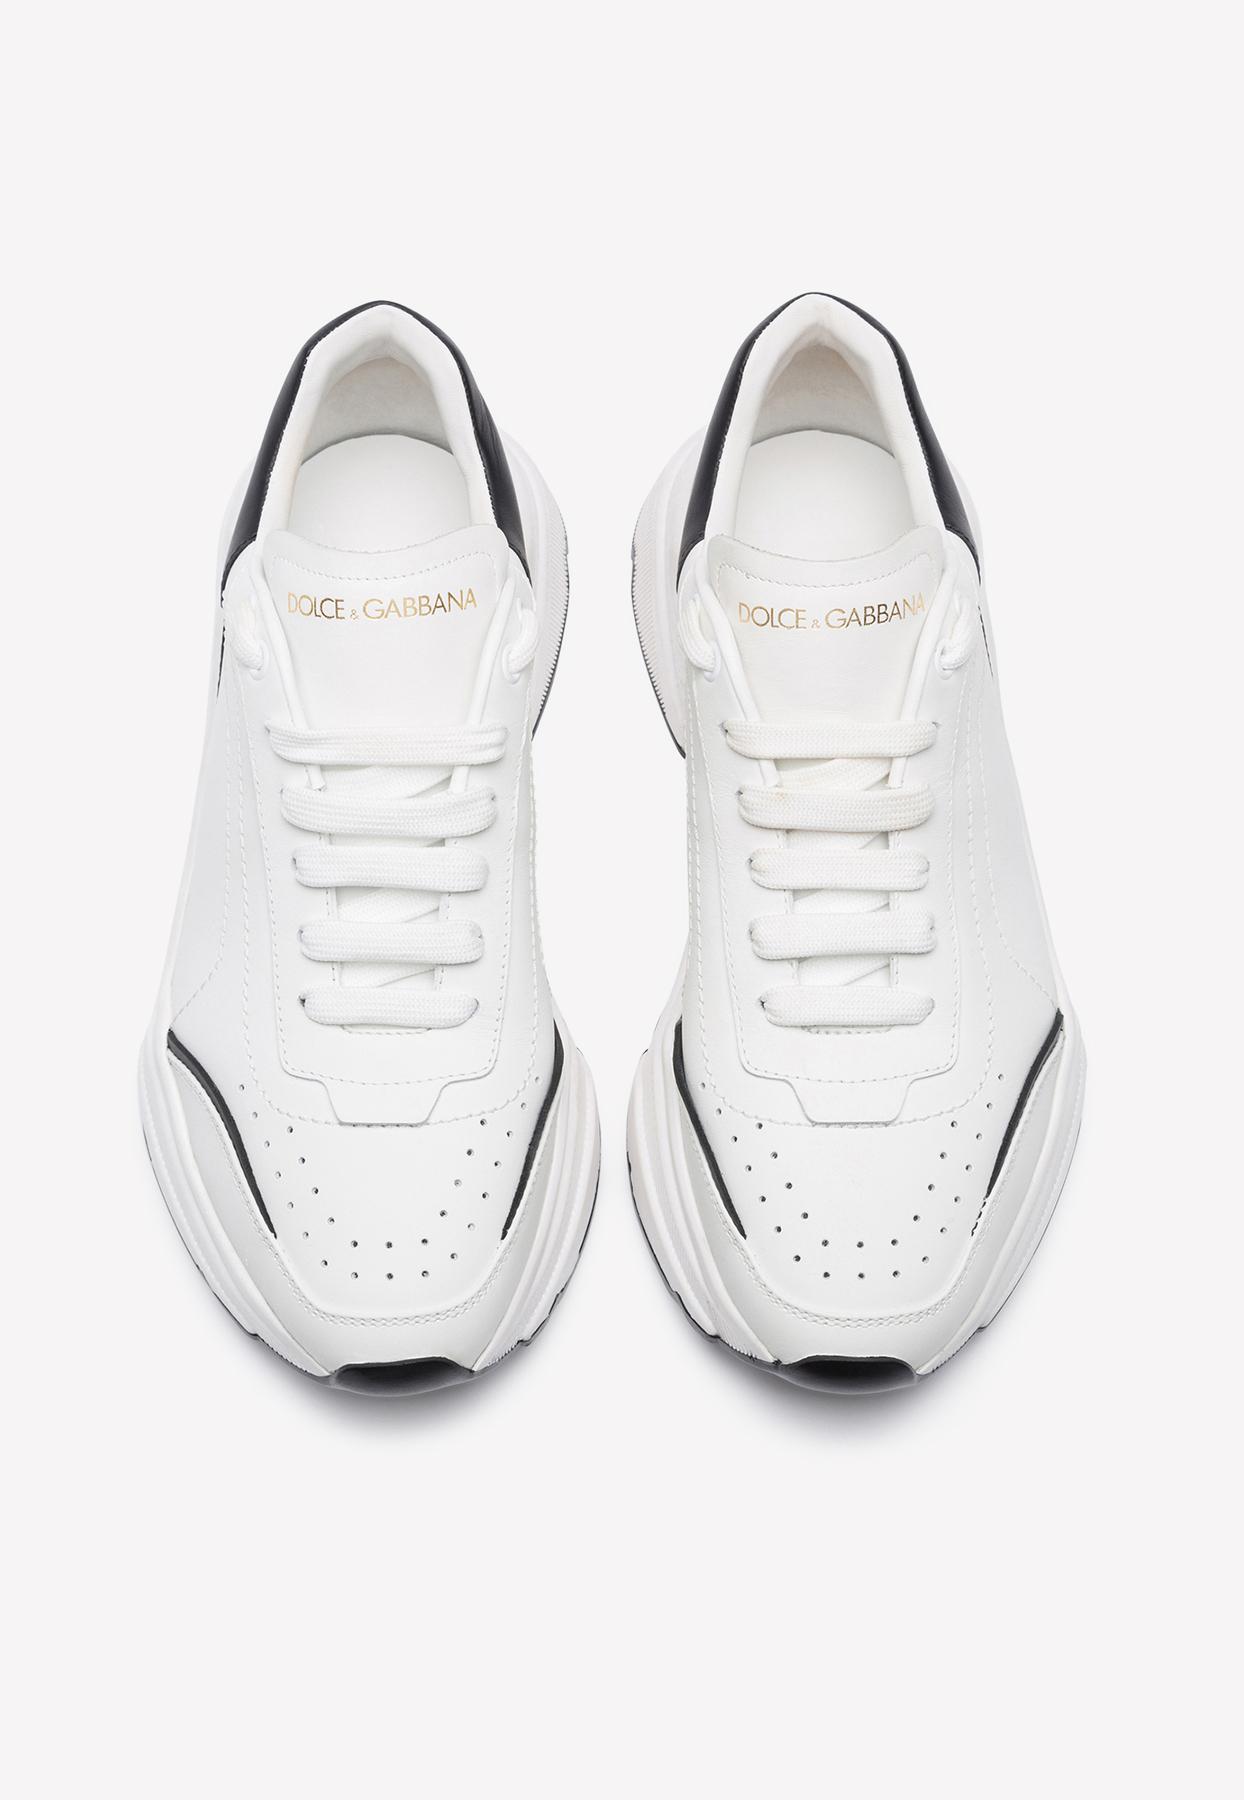 Dolce & Gabbana Denim Nappa Leather Daymaster Sneakers | Lyst